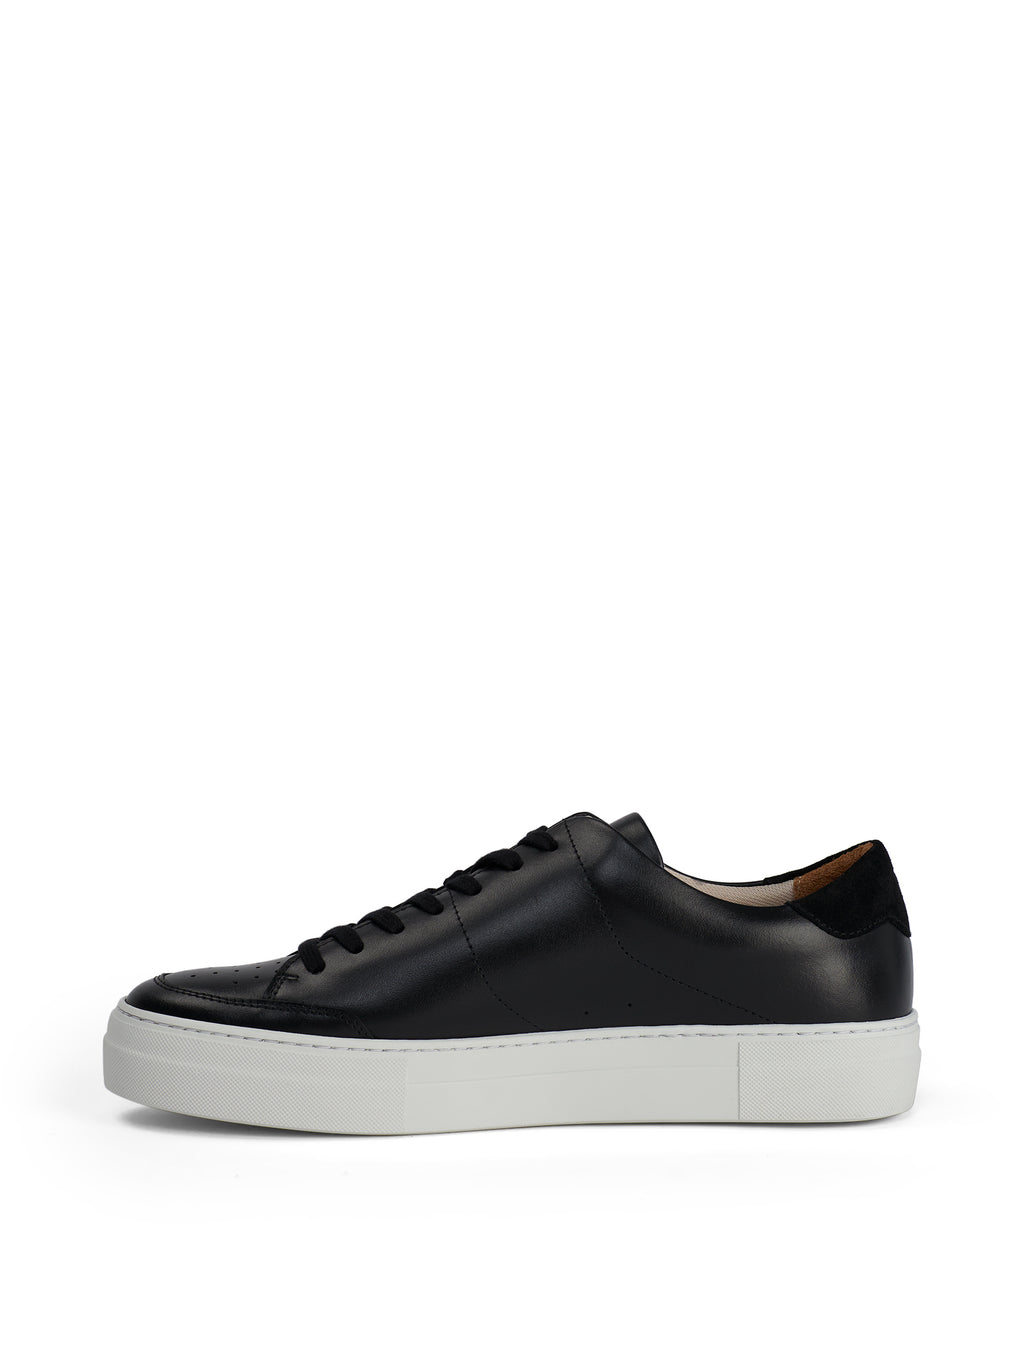 Art Signature Leather Sneakers – J.LINDEBERG